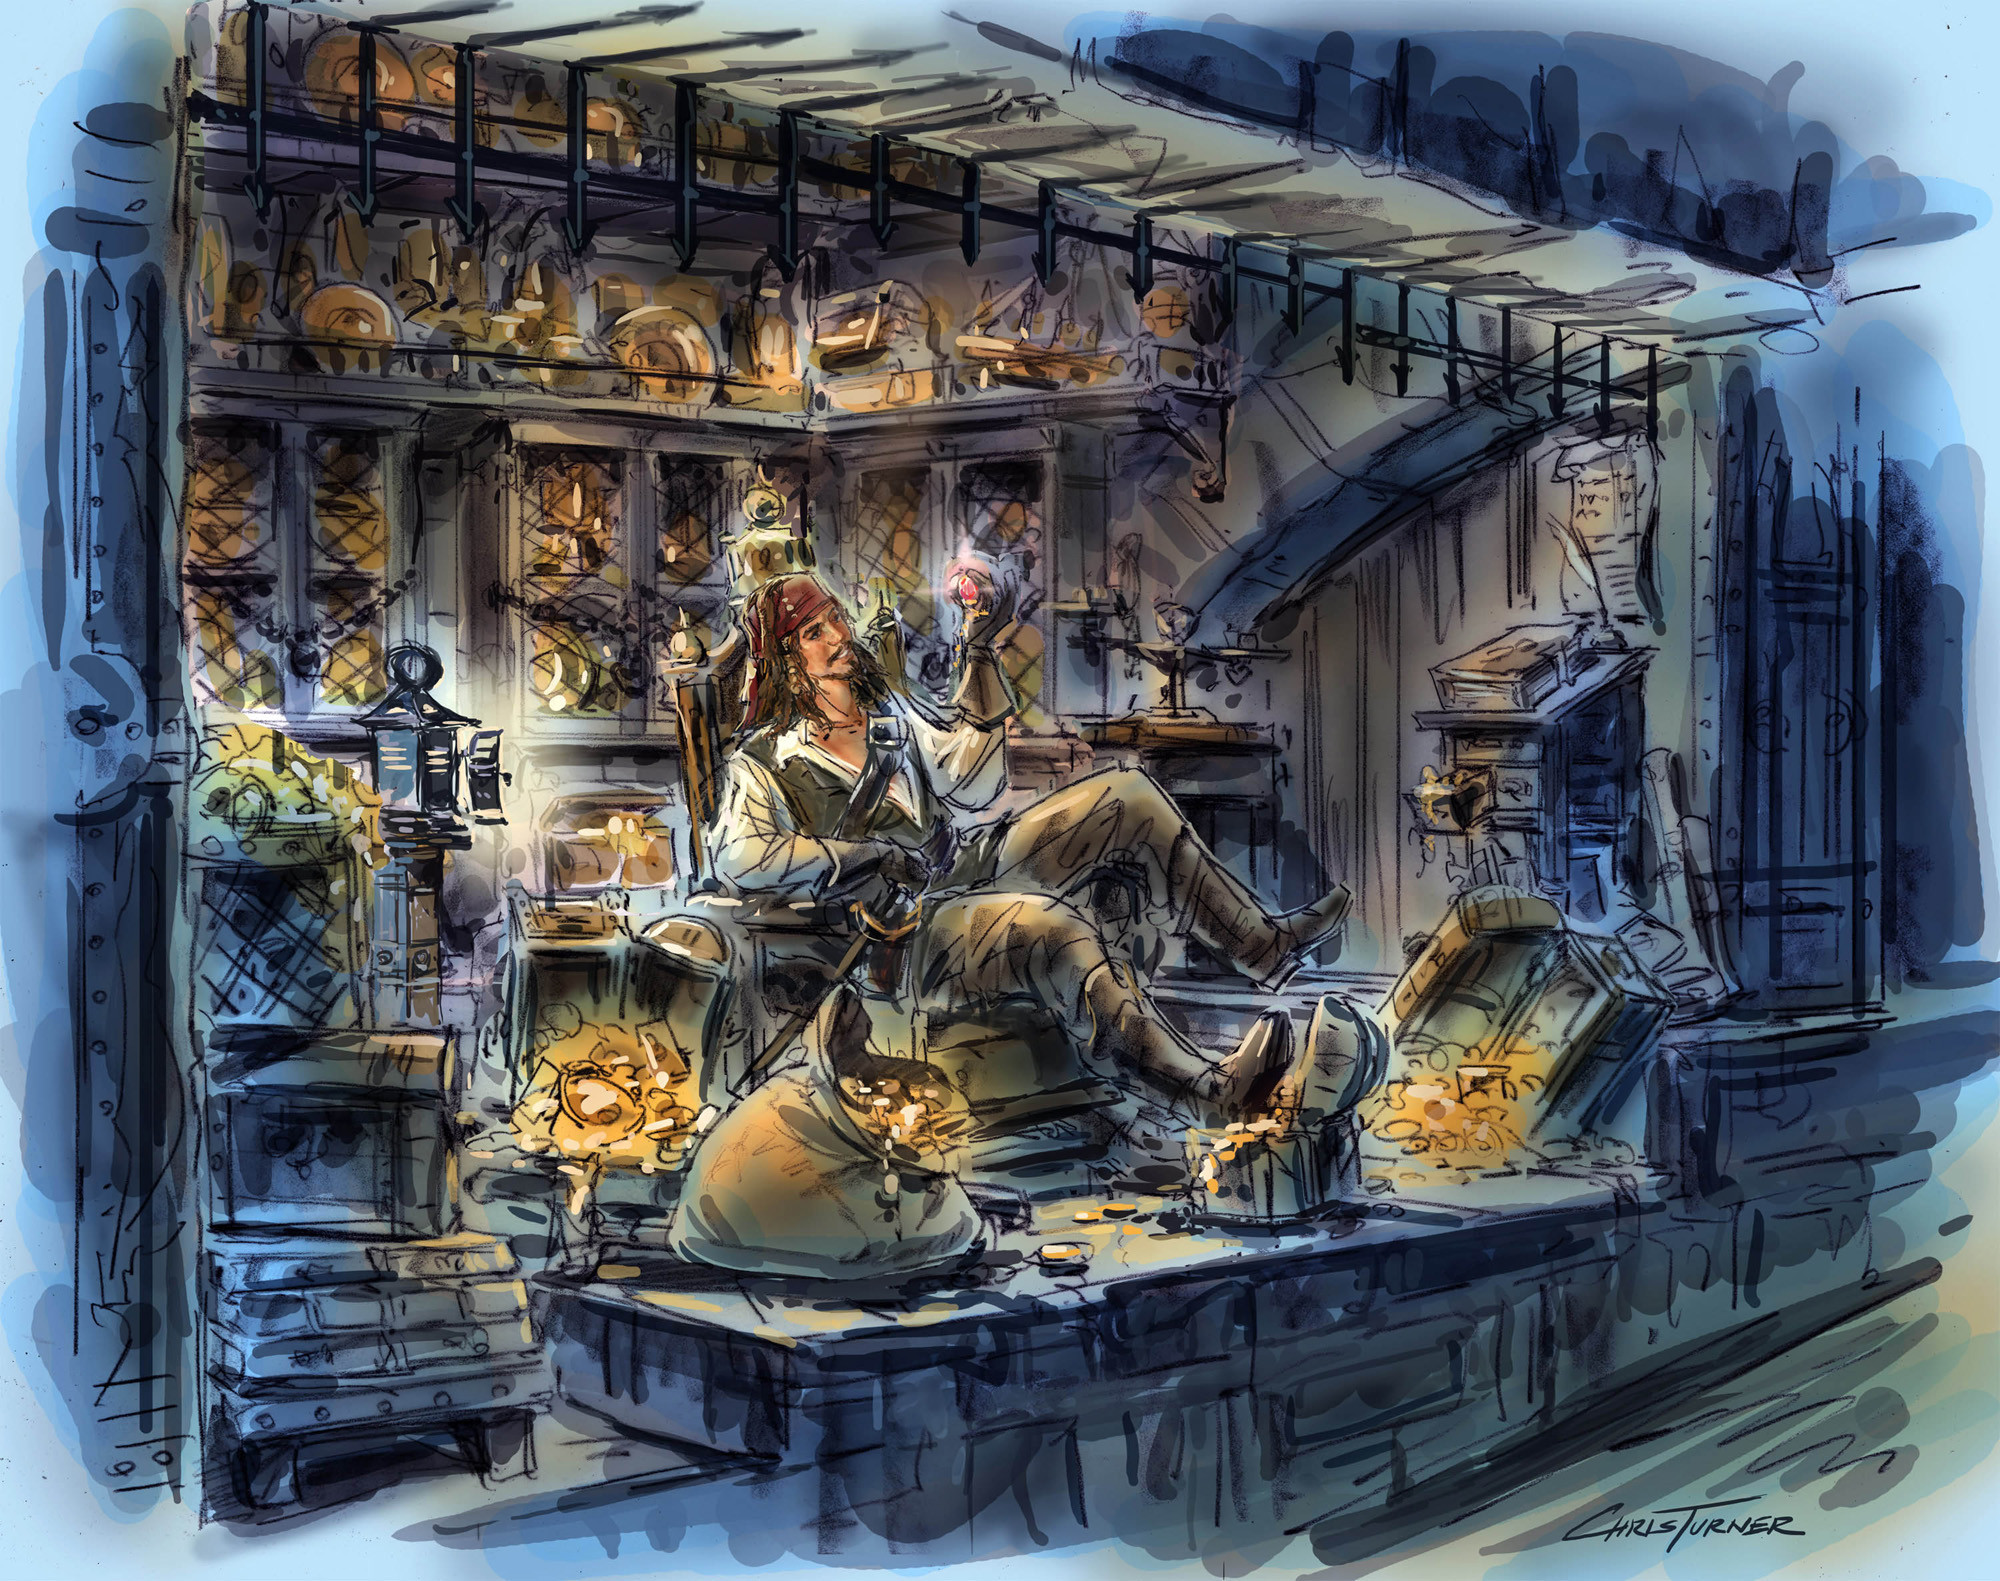 An artist's rendering of Jack Sparrow in the Pirates attraction.